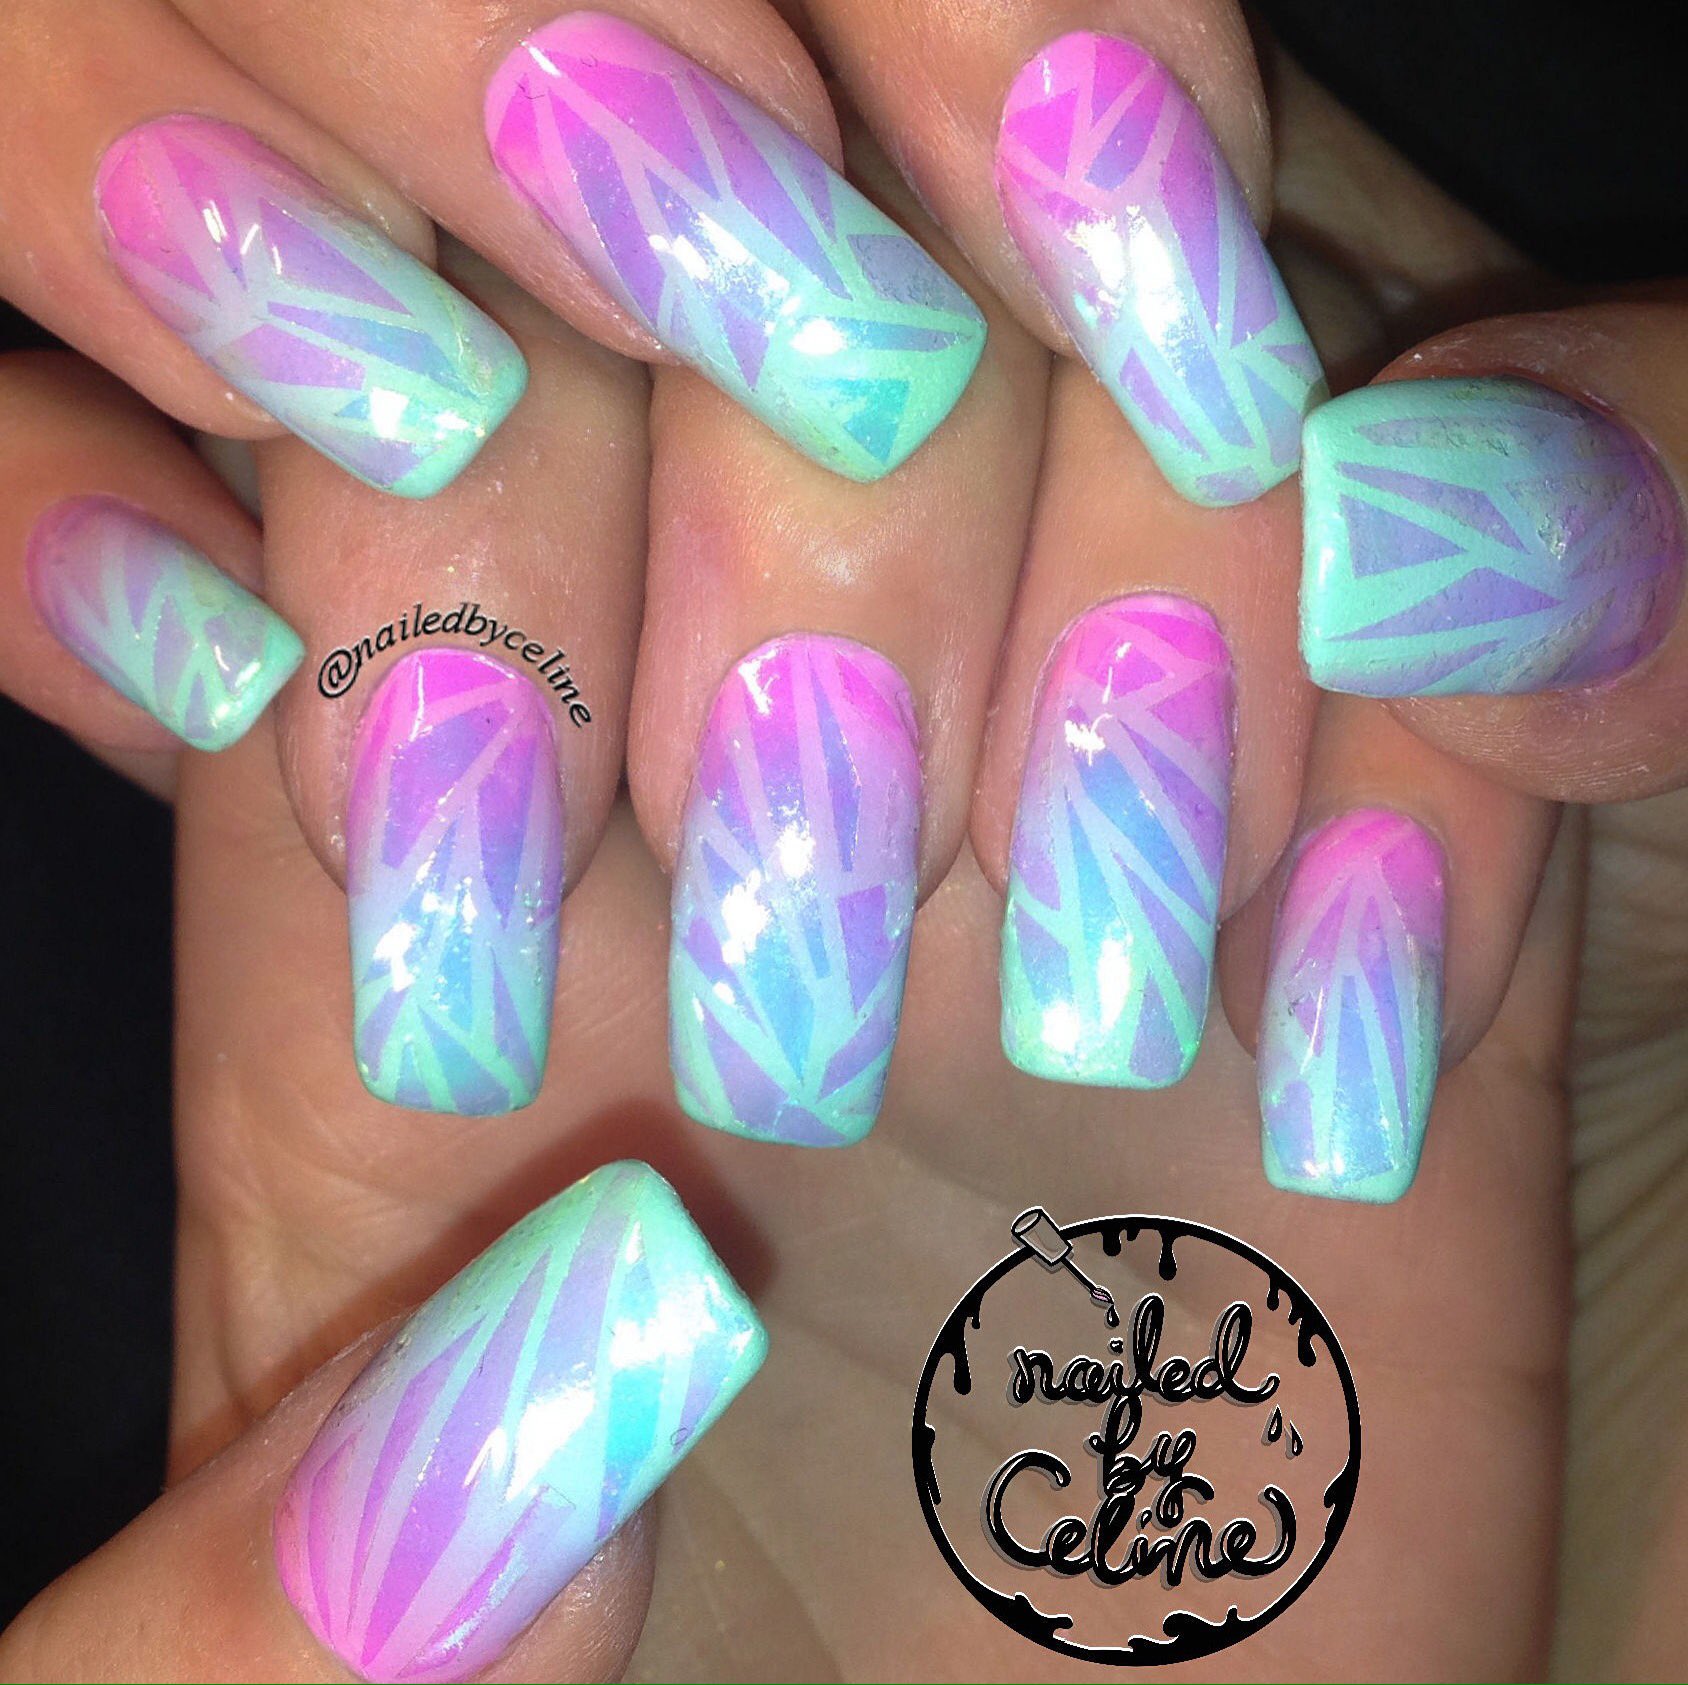 Just my nails on Tumblr: Glass Nails ;)